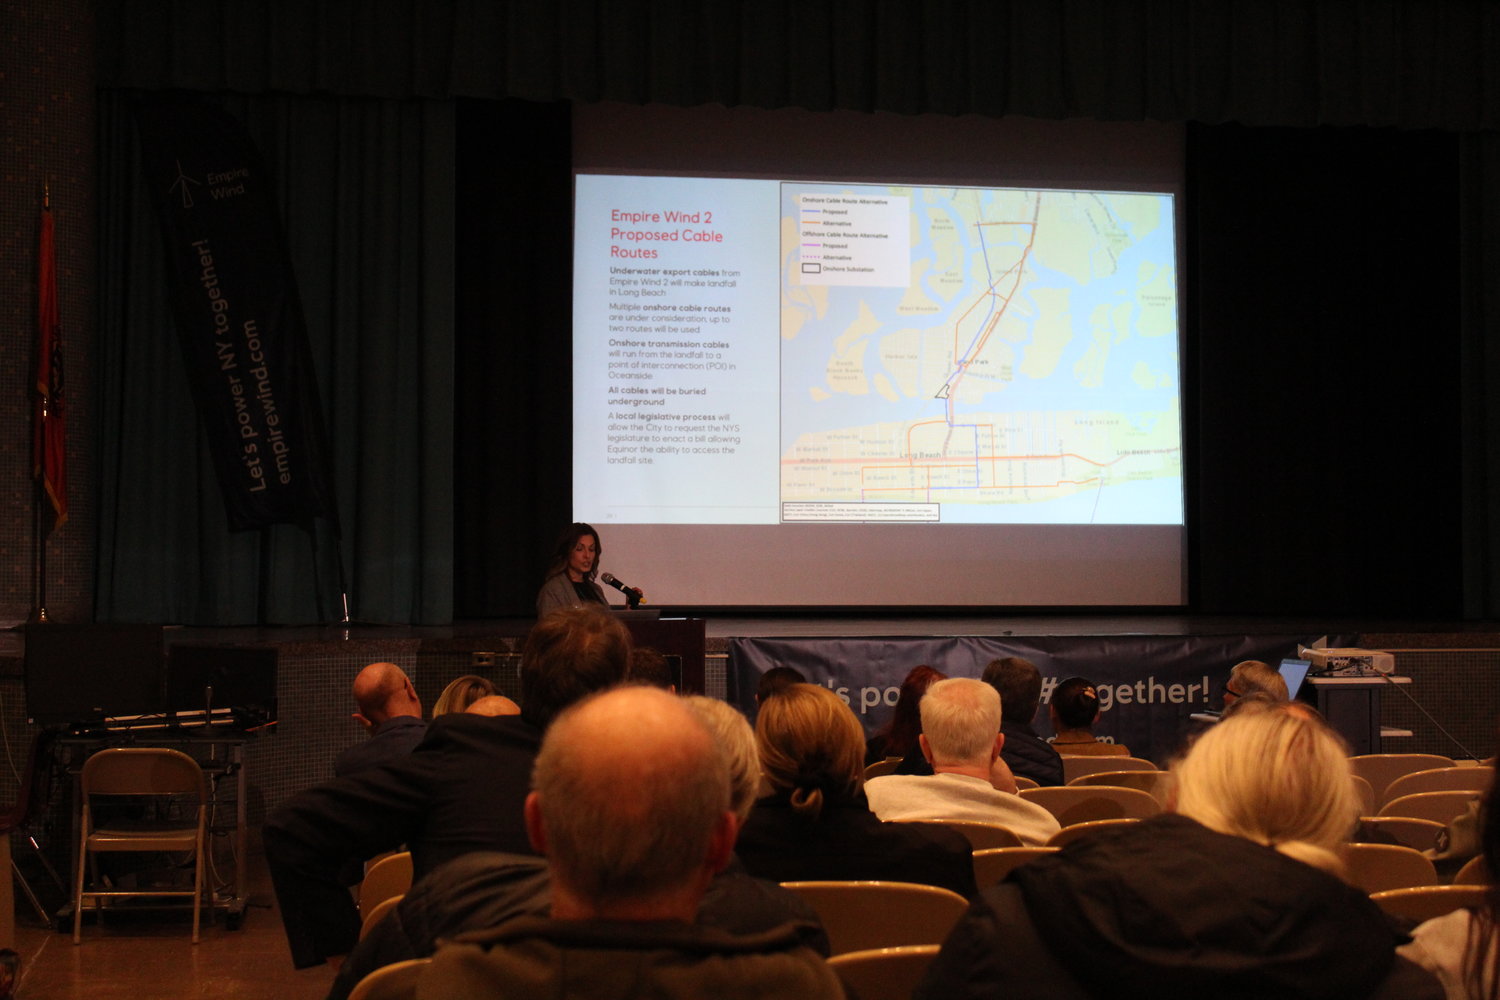 Island Park residents came out in droves to learn about the $3 billion Empire Wind project coming to Long Island’s South Shore. On the screen is the proposed cable routes through Island Park parallel to the Long Island Rail Road.